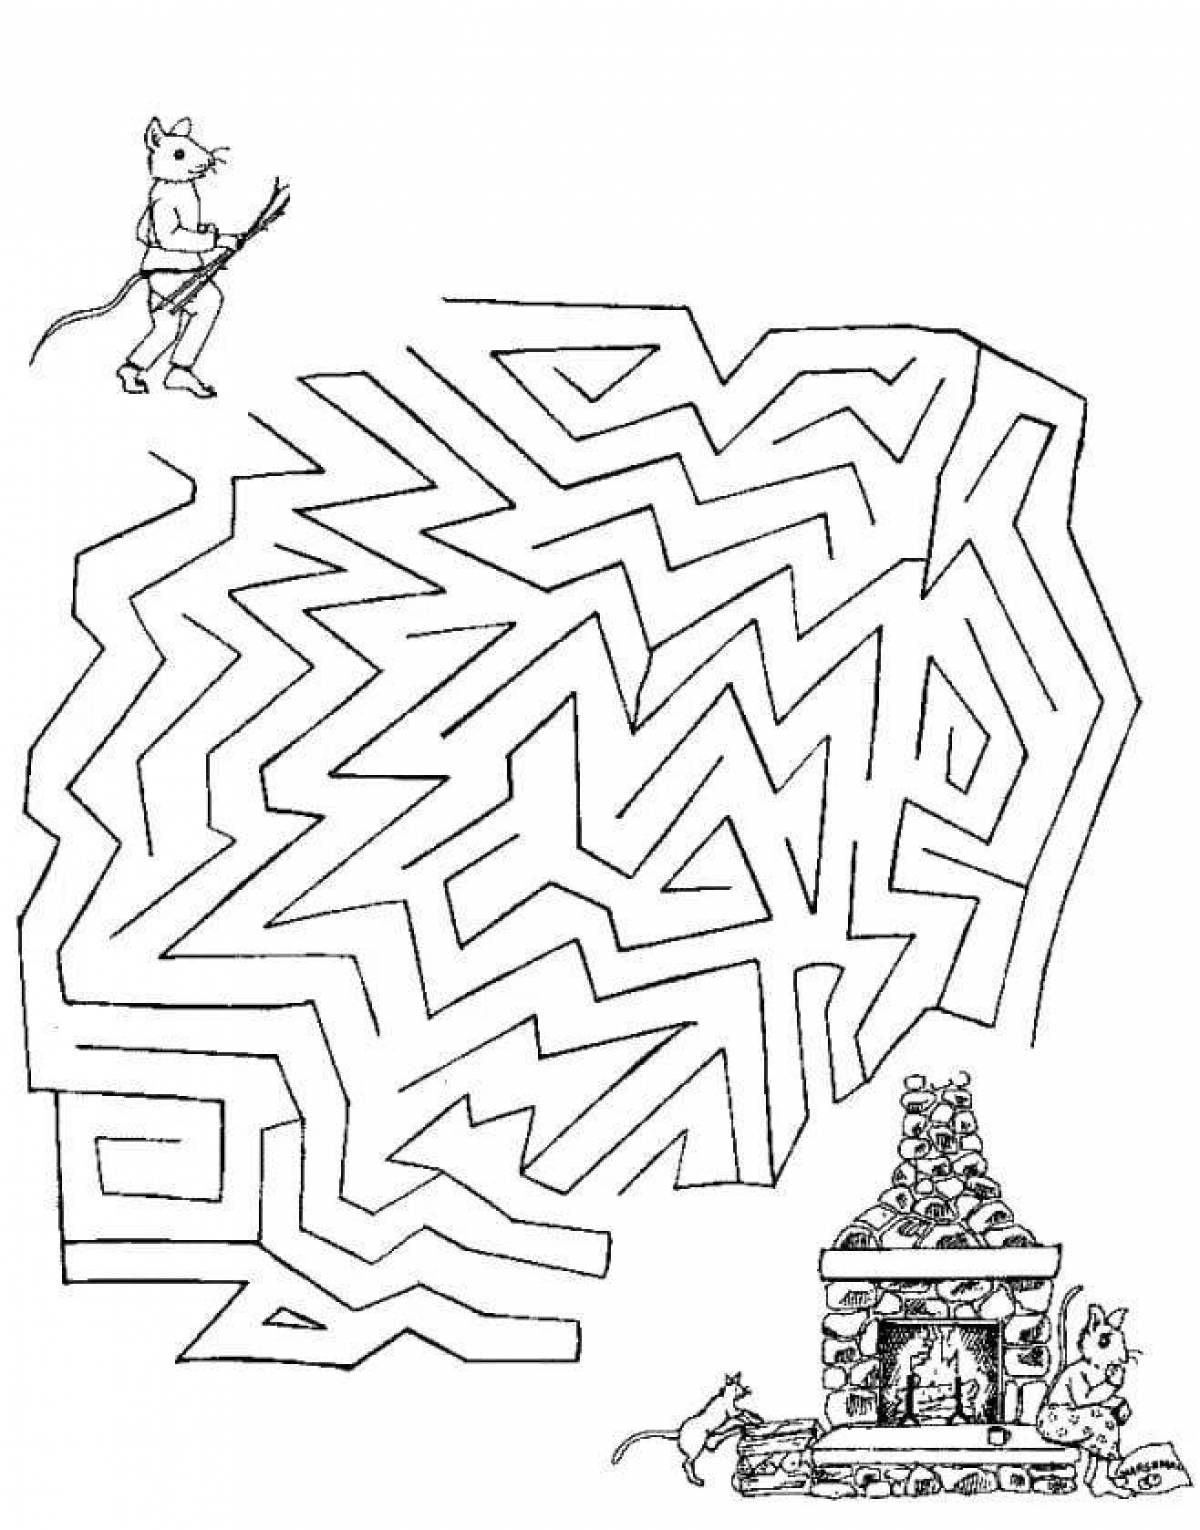 Intricate maze coloring book for kids